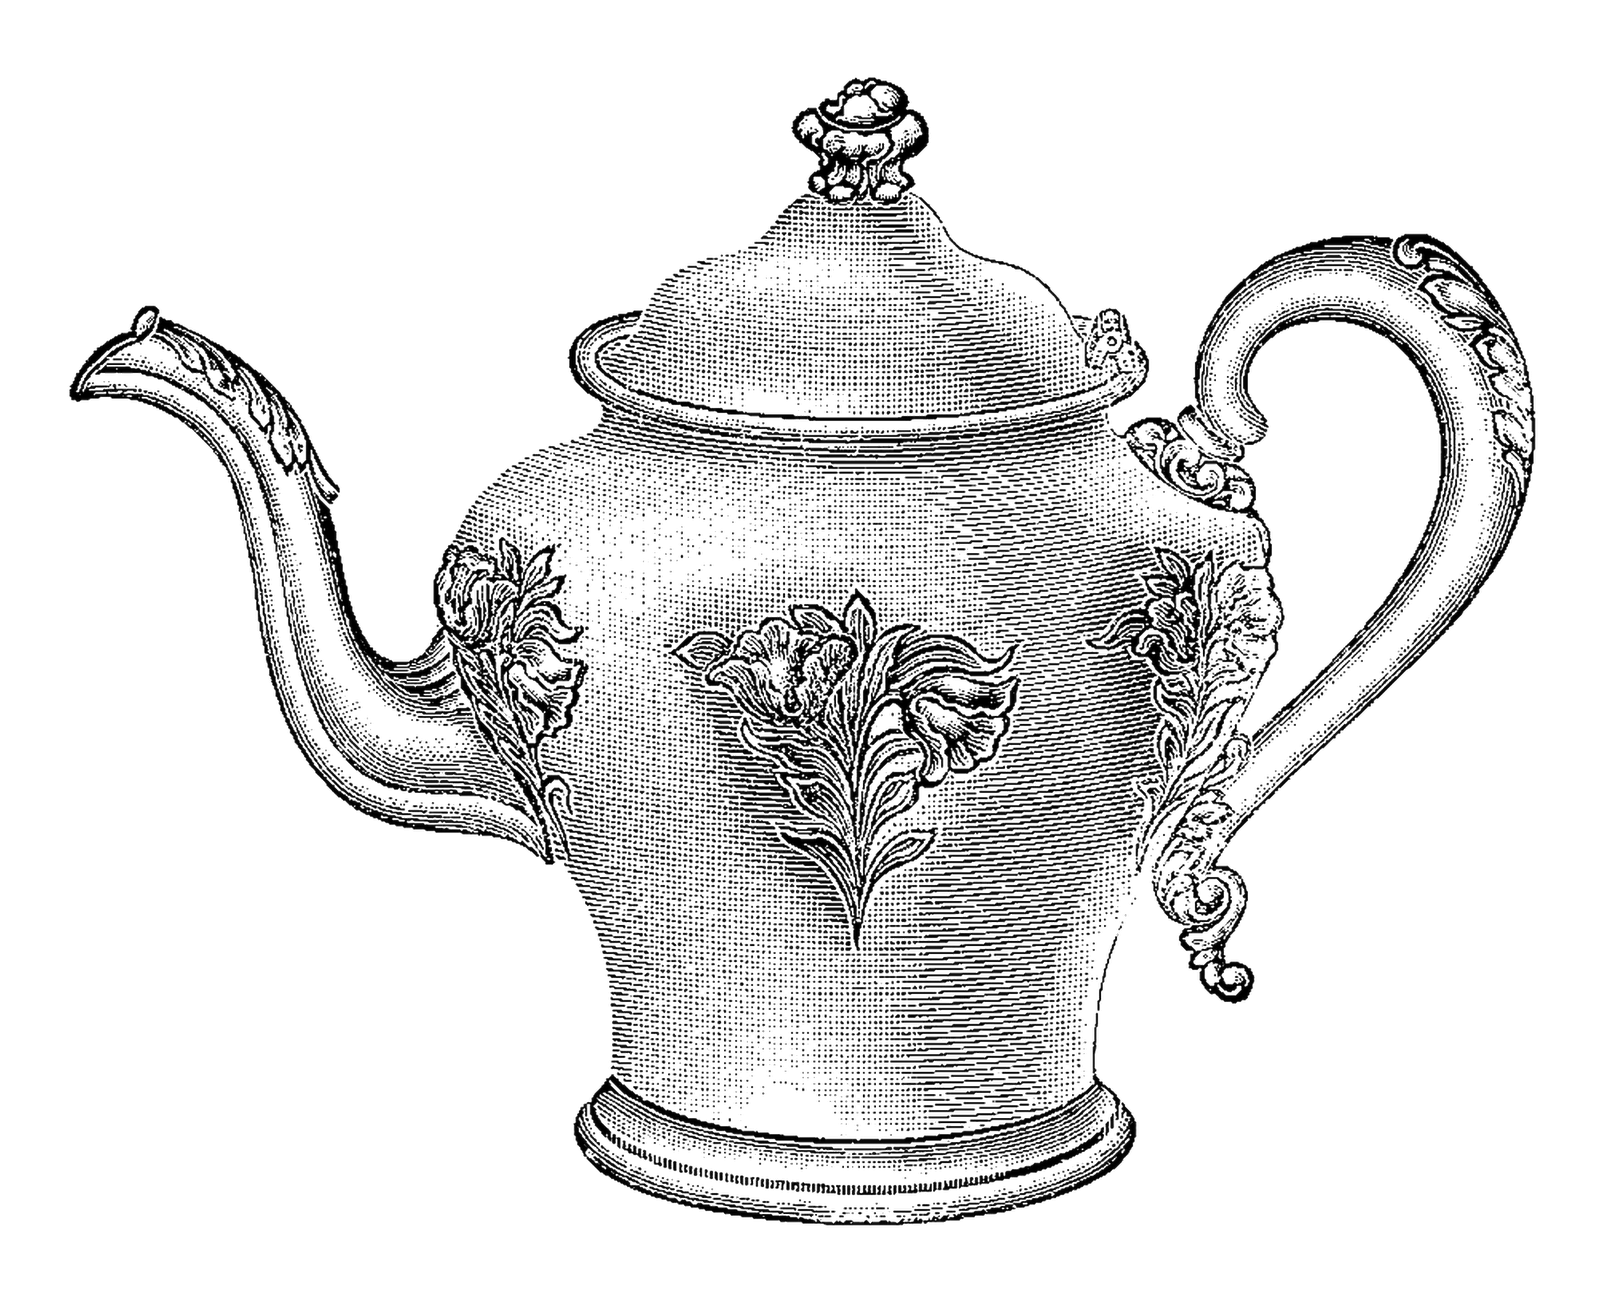 An Absolutely Beautiful Vintage Teapot Design  I Created This Teapot